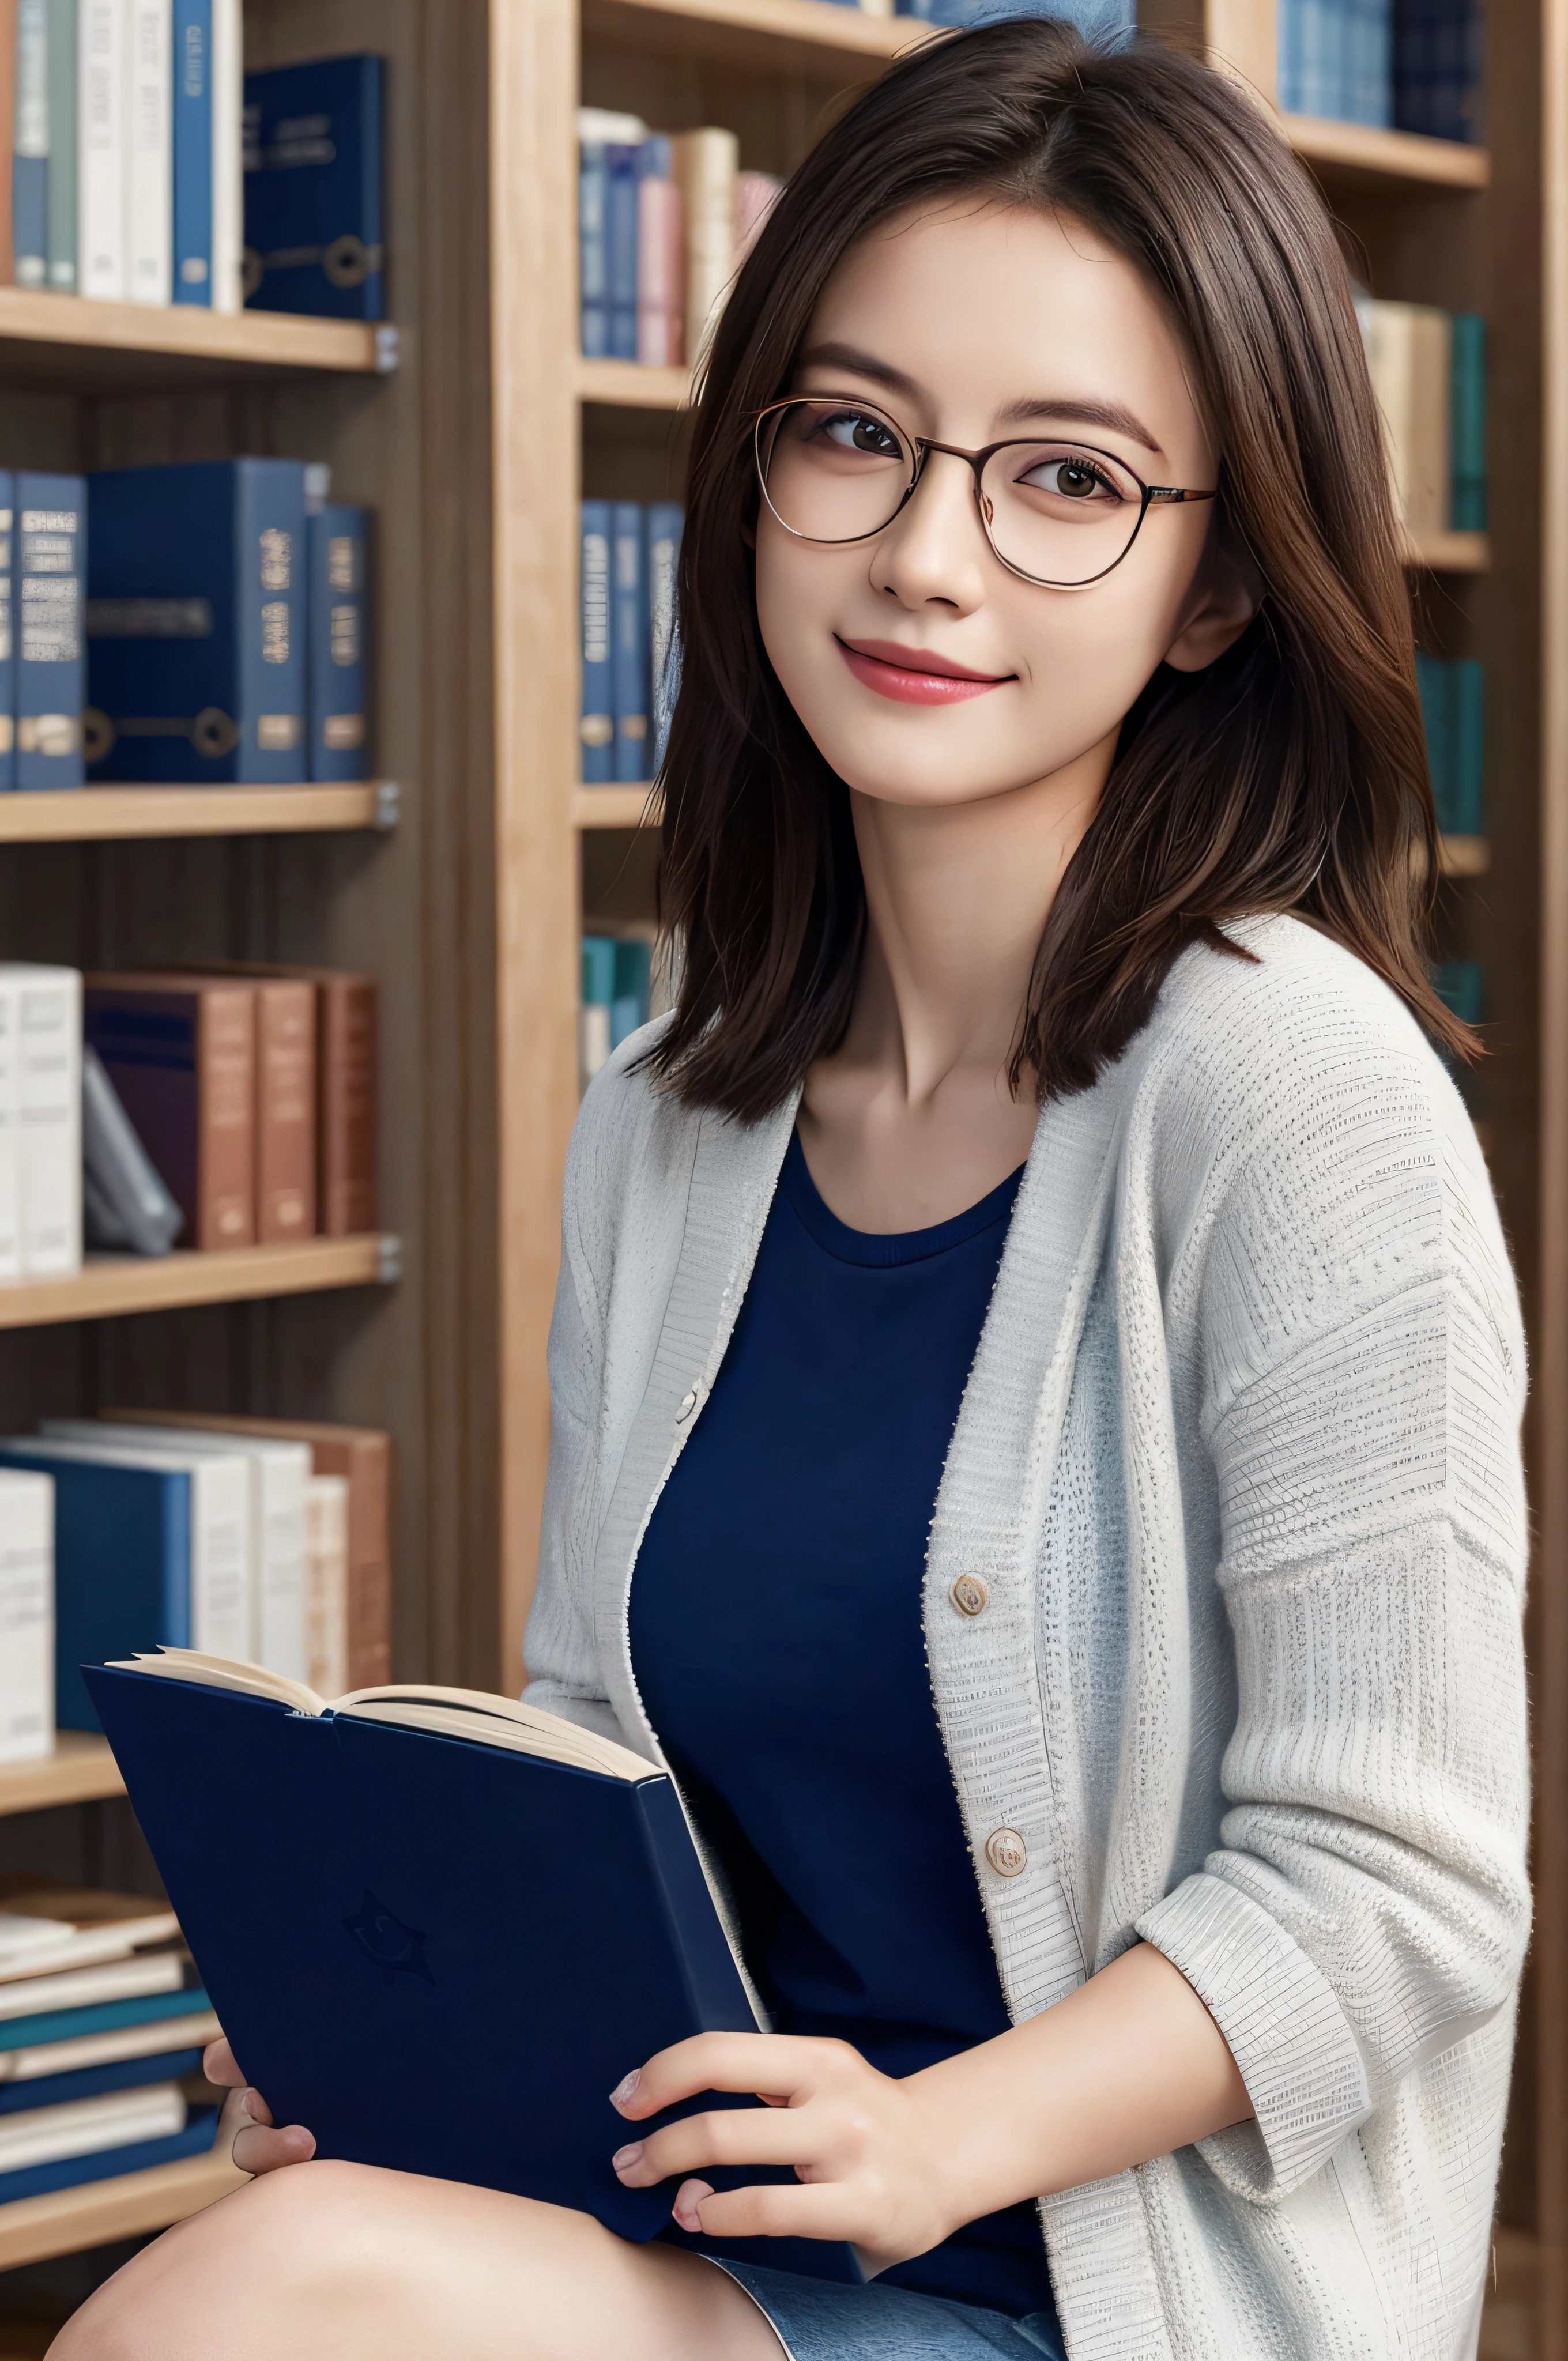 masterpiece, best quality, extremely detailed CG unity 8k wallpaper,
a beautiful girl, reading a book,
university student, glasses,
library, detailed background,